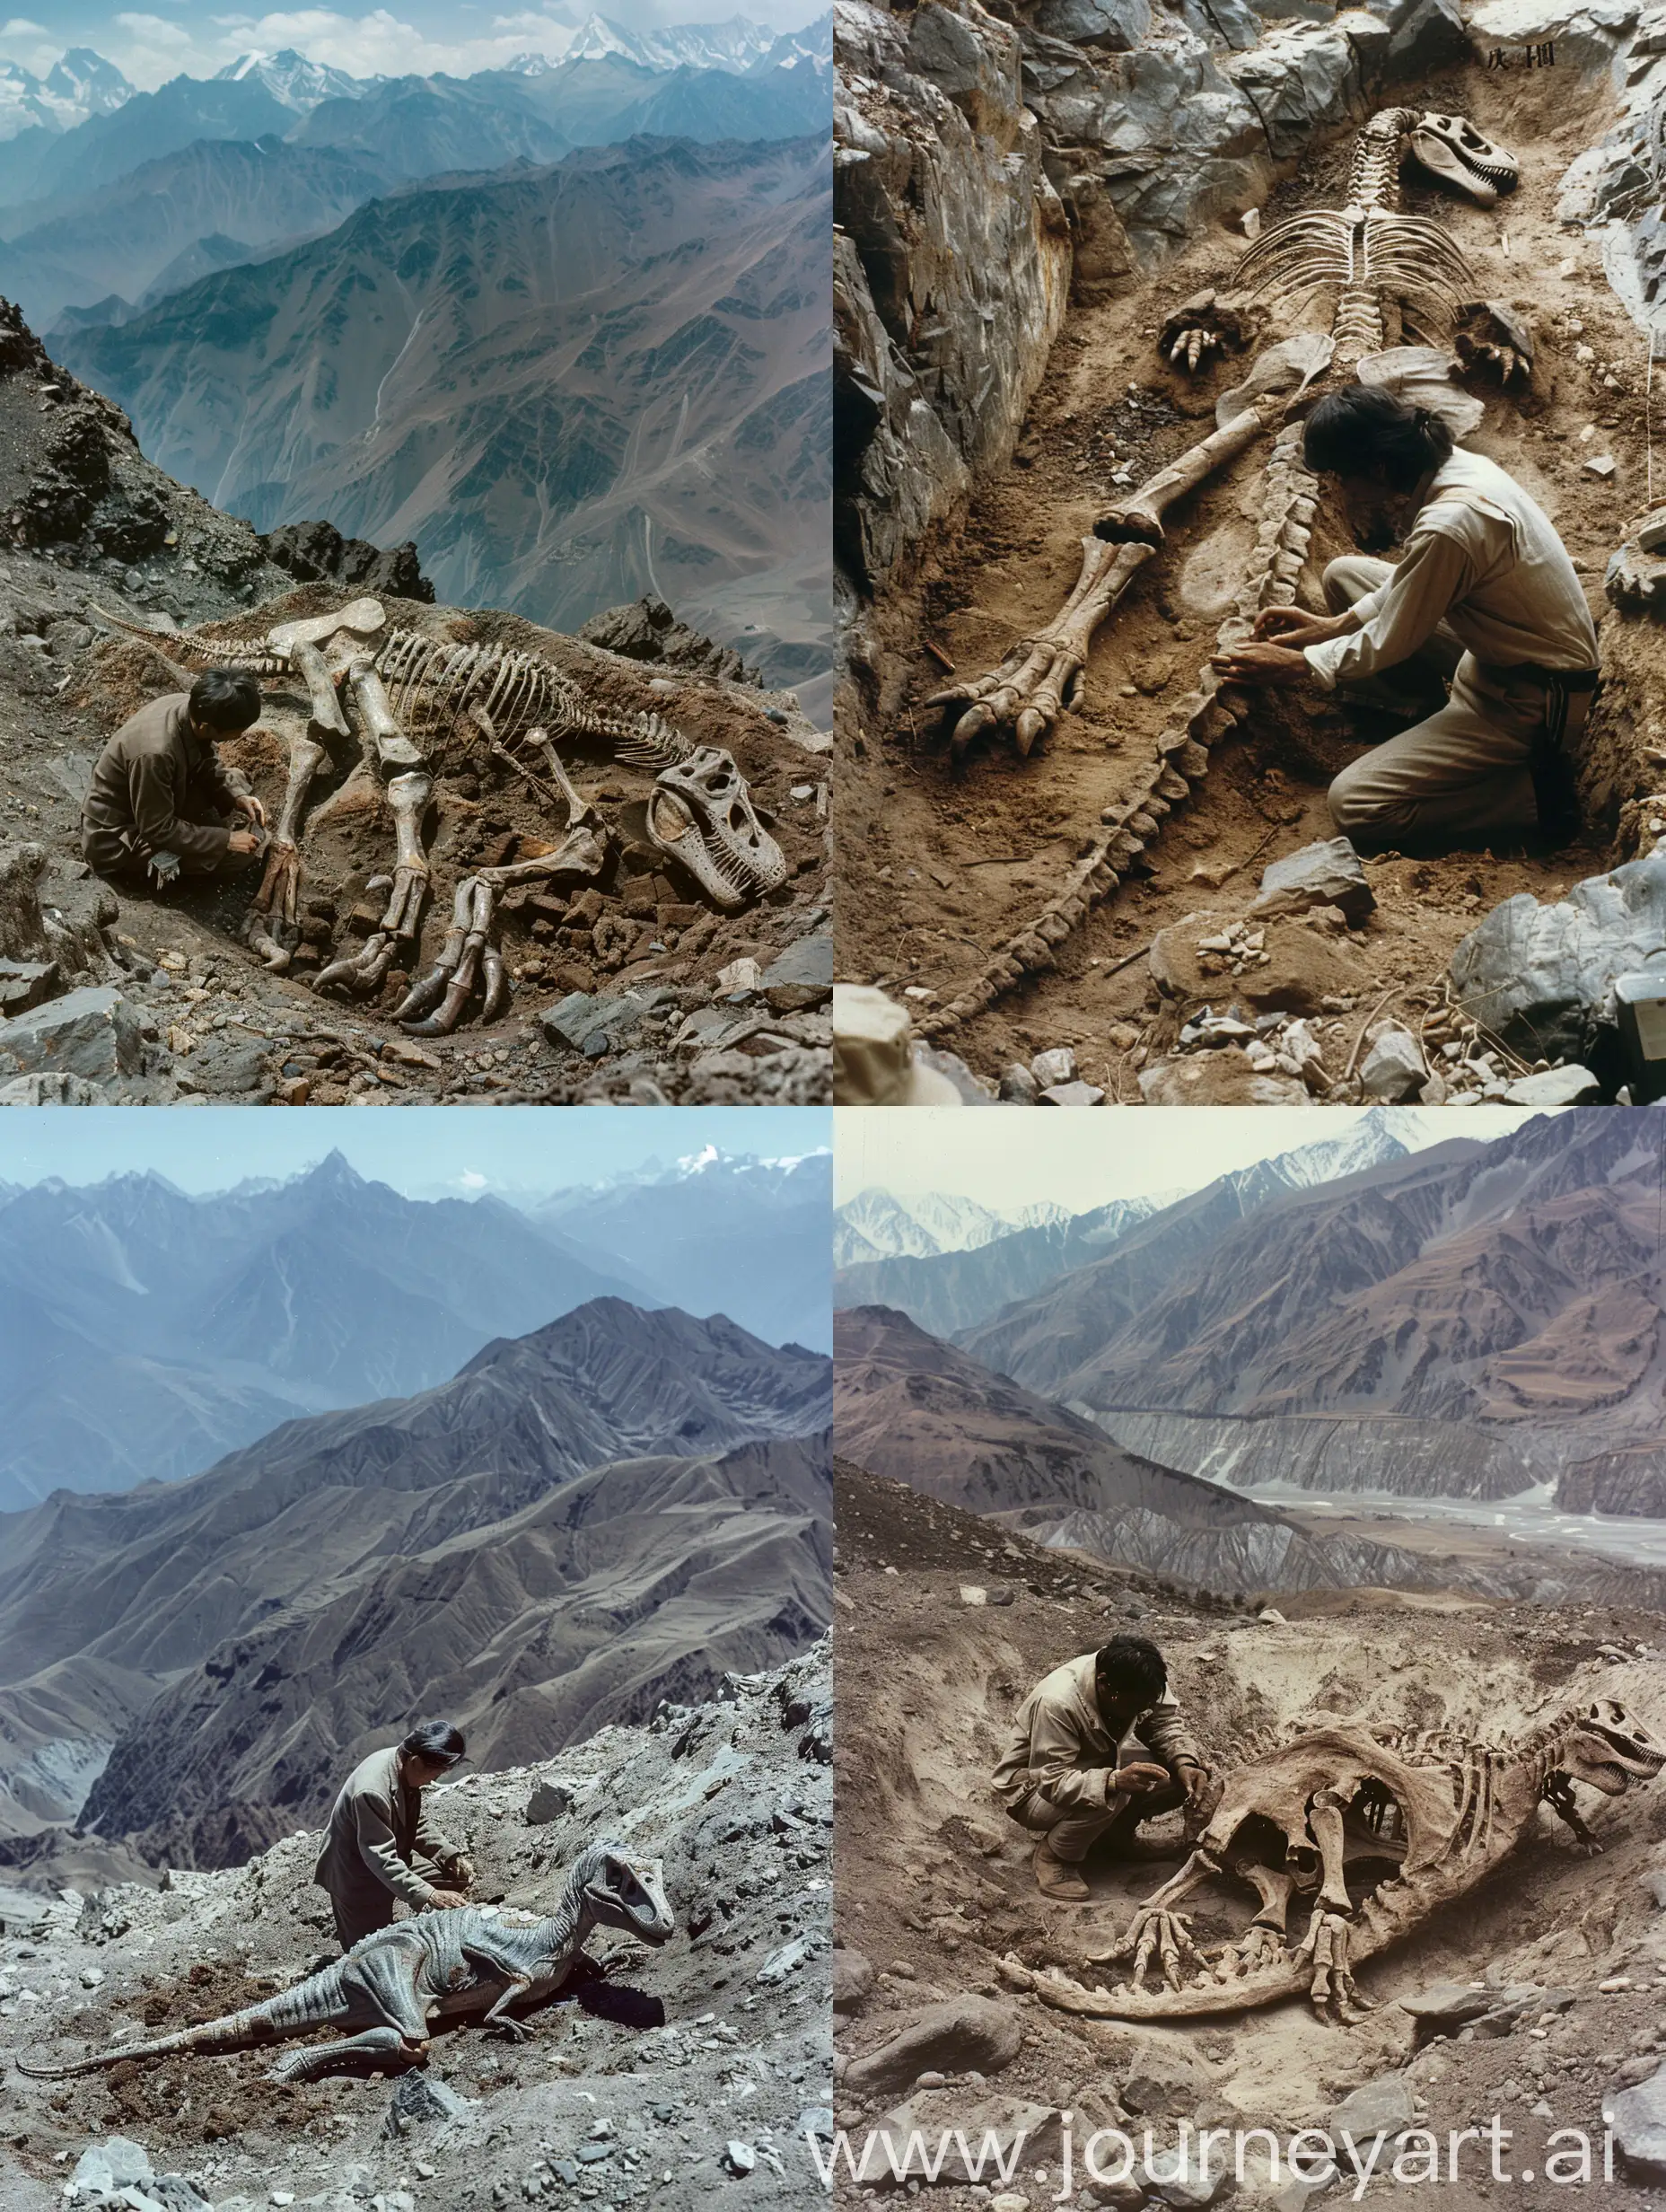 on top of himalaya, a biologist find mummified dinosaur body in the style of H.R.Giger buried in soil, china, 1980s 